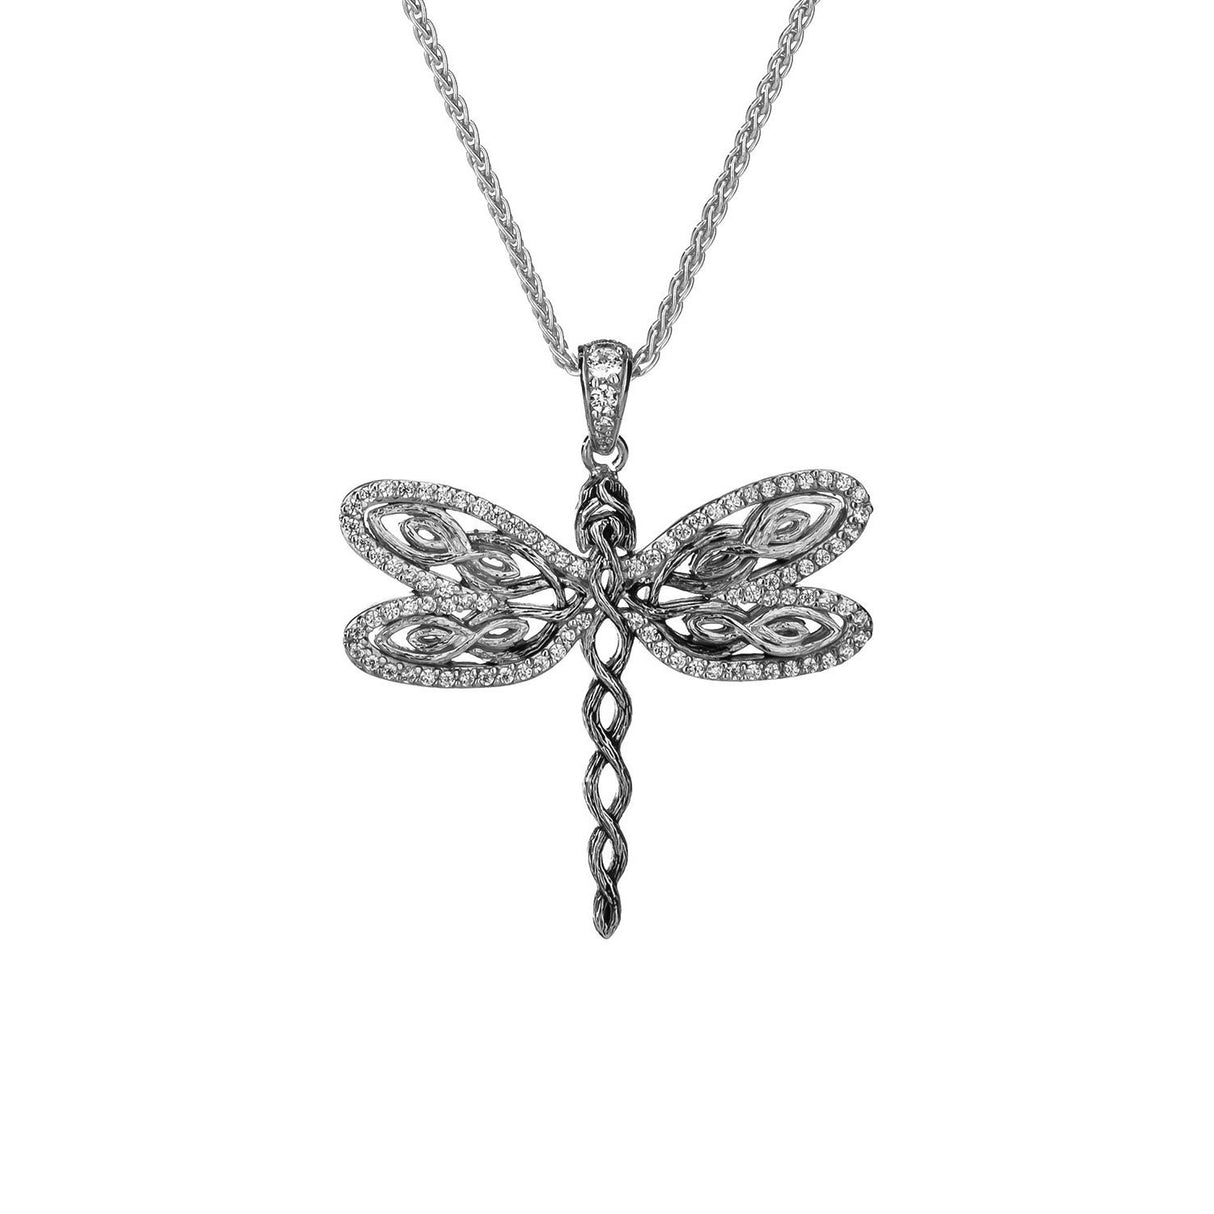 Dragonfly Pendant - Sterling Silver / Dark Rhodium and White Cubic Zirconia